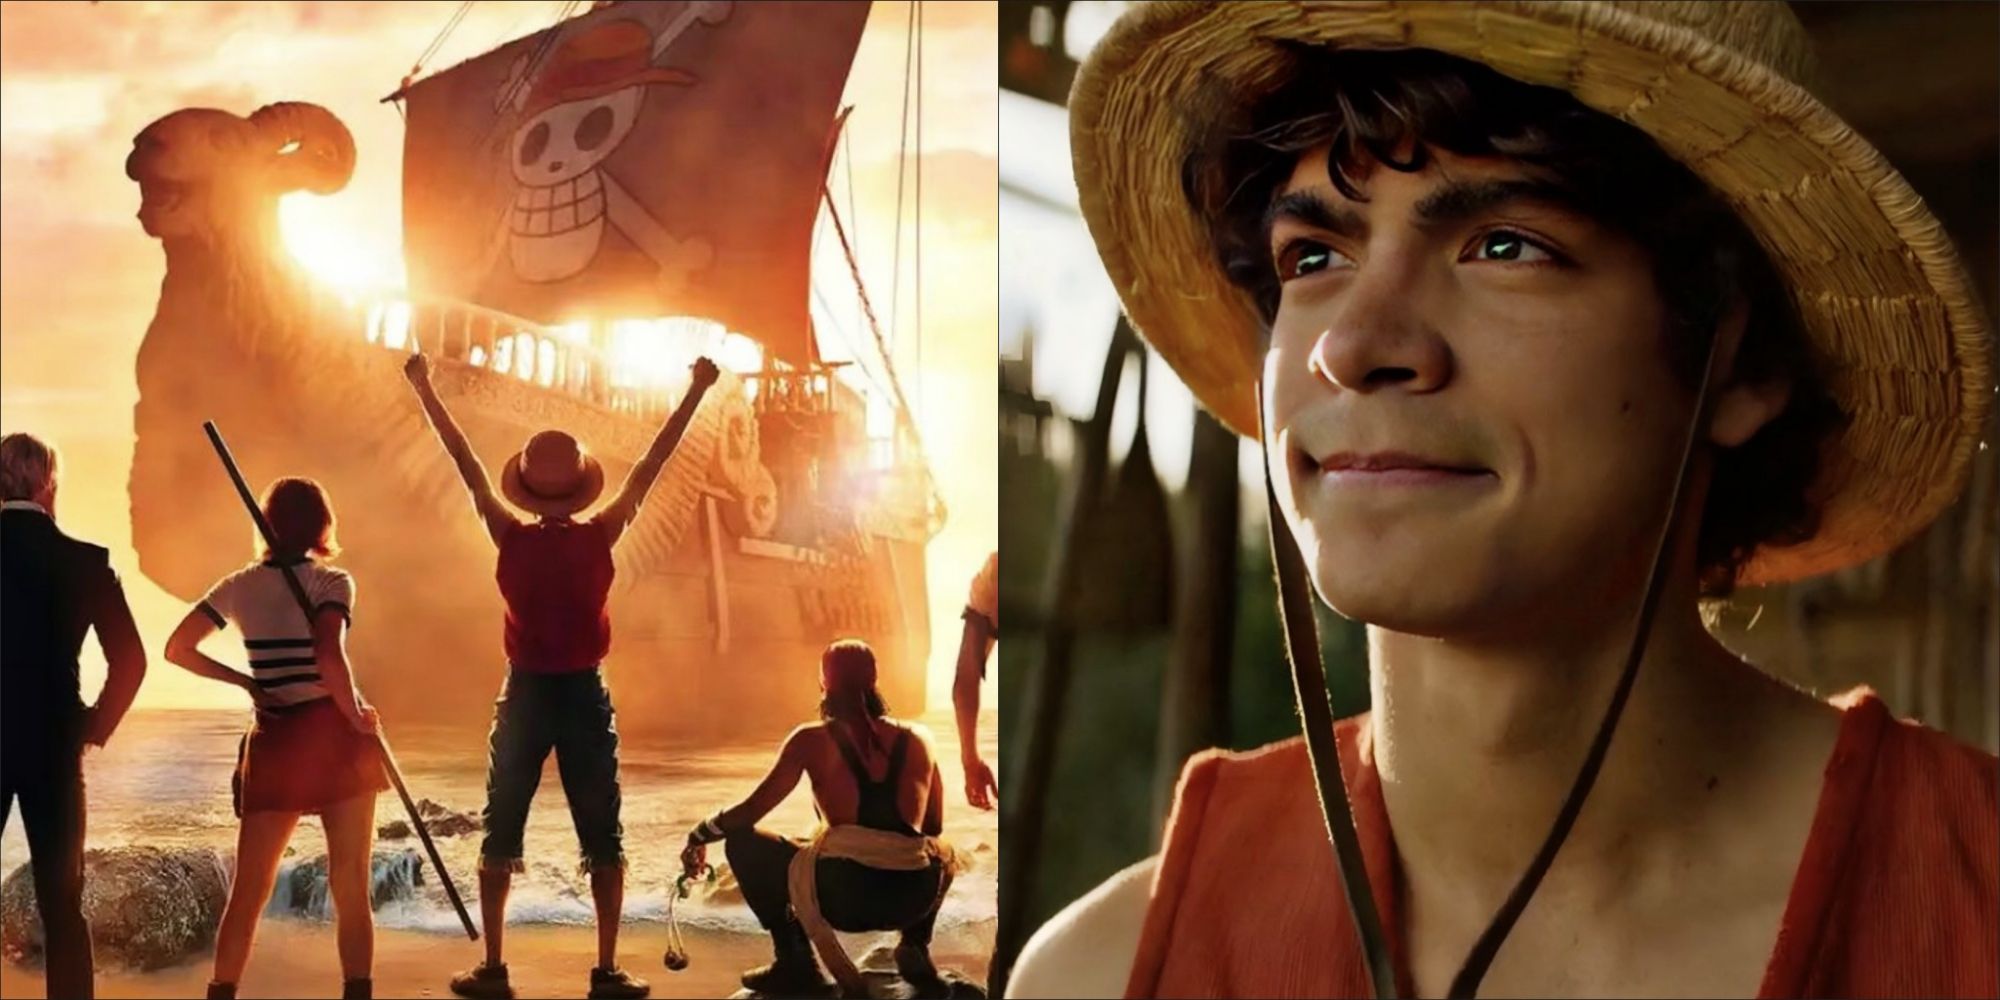 Meet The 'One Piece' Live Action Cast: Usopp, Zoro, And More Characters